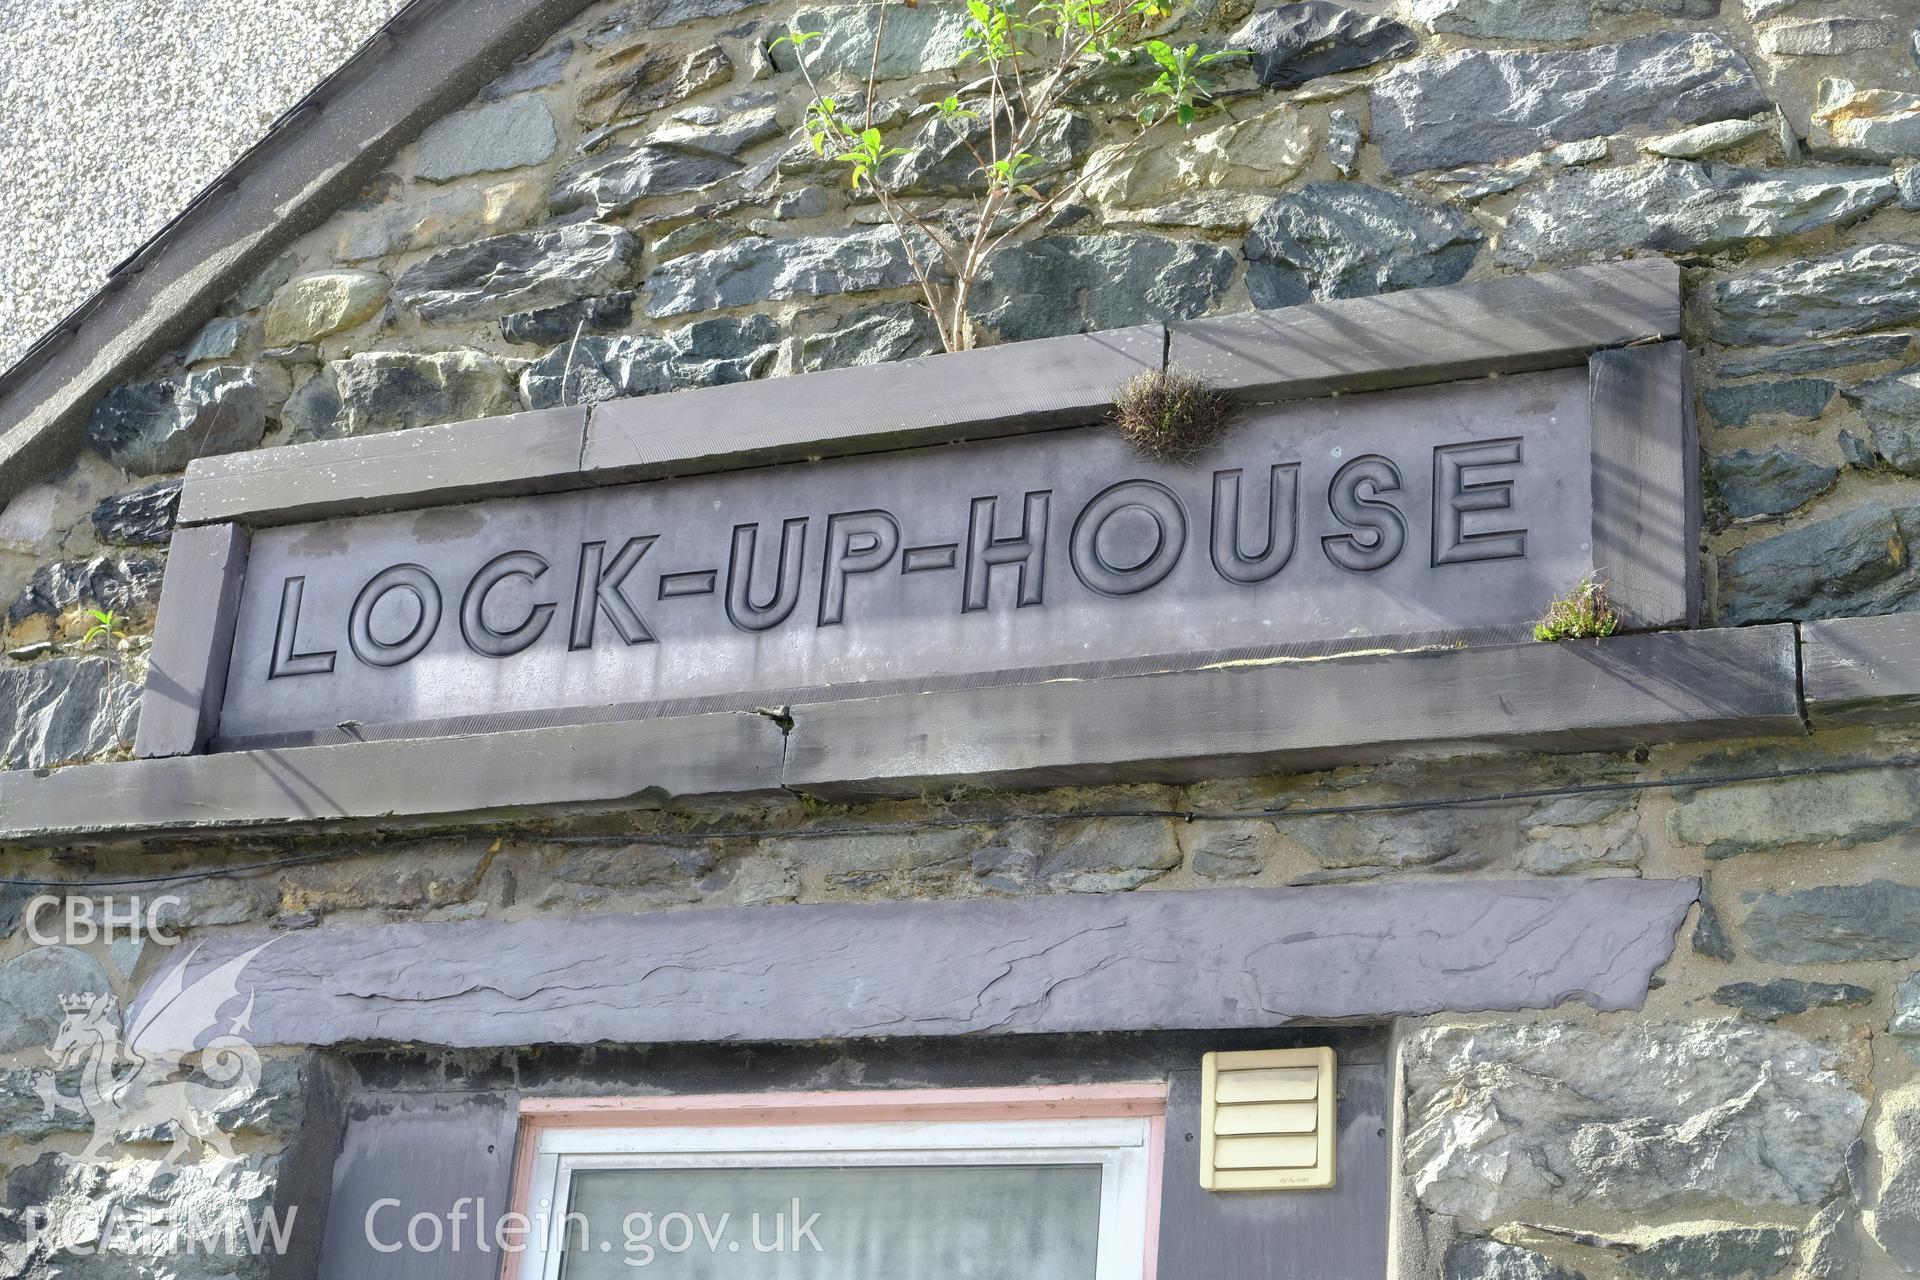 Colour photograph showing detail of the facade at the old Lock-up House, Glanafon Street, Bethesda, produced by Richard Hayman 16th March 2017